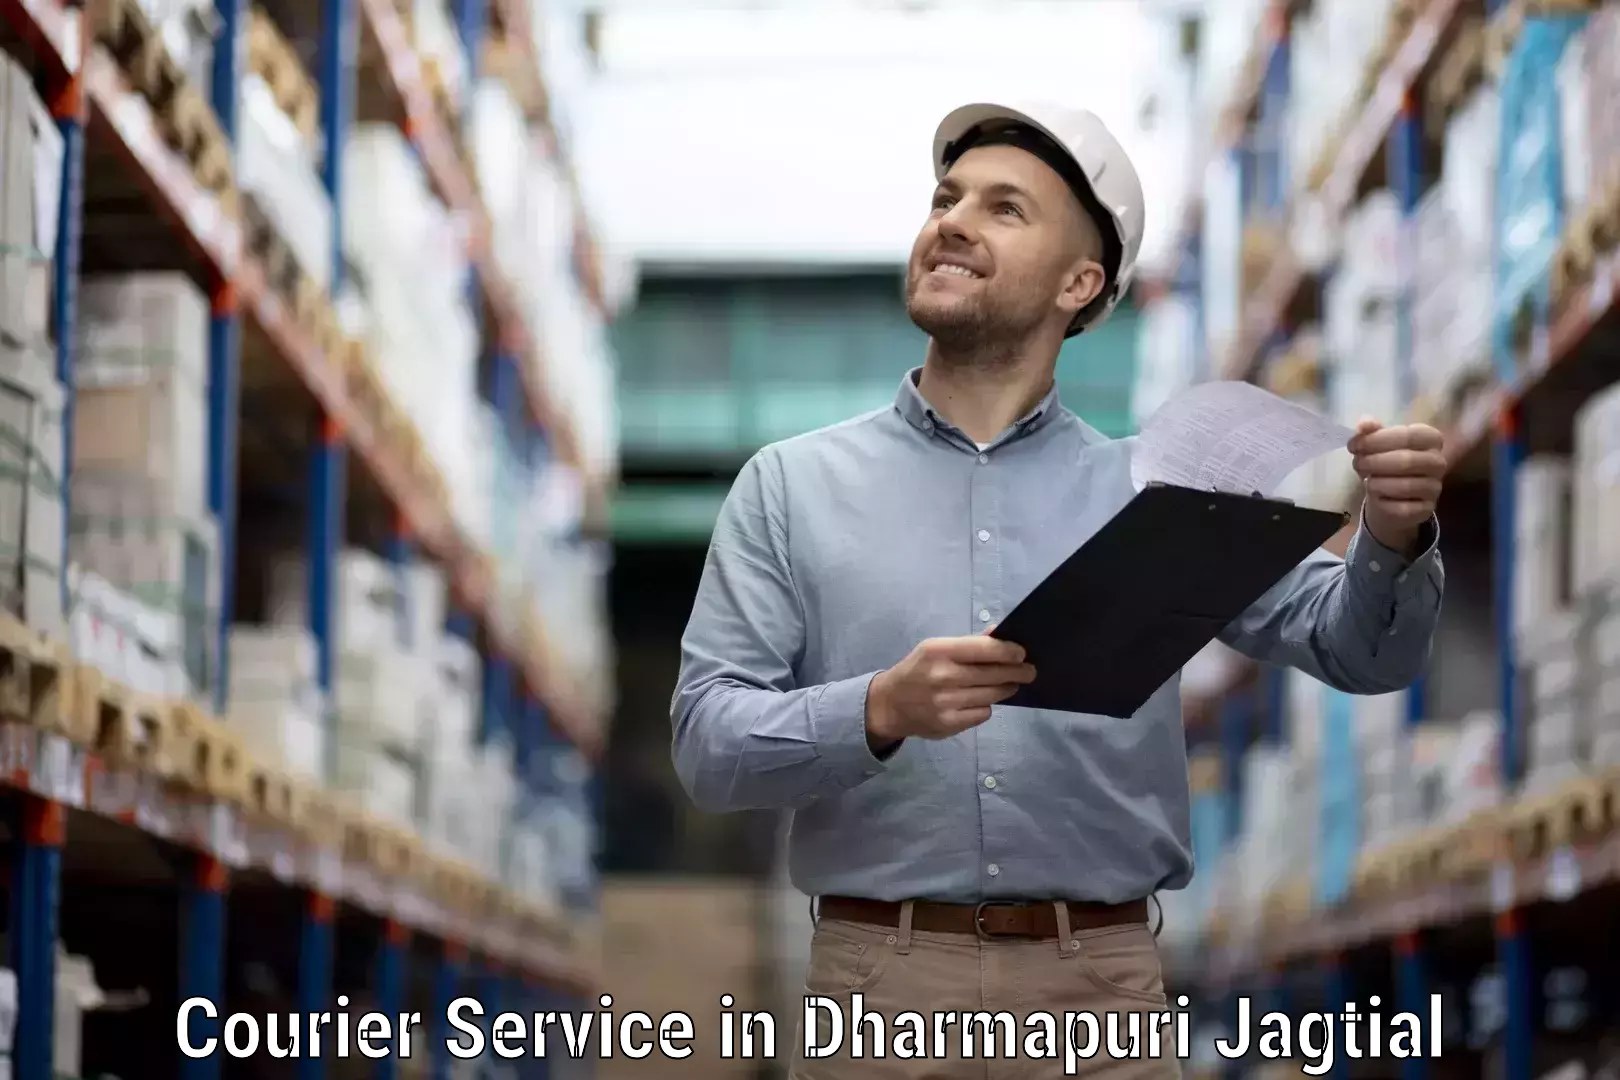 Fast-track shipping solutions in Dharmapuri Jagtial